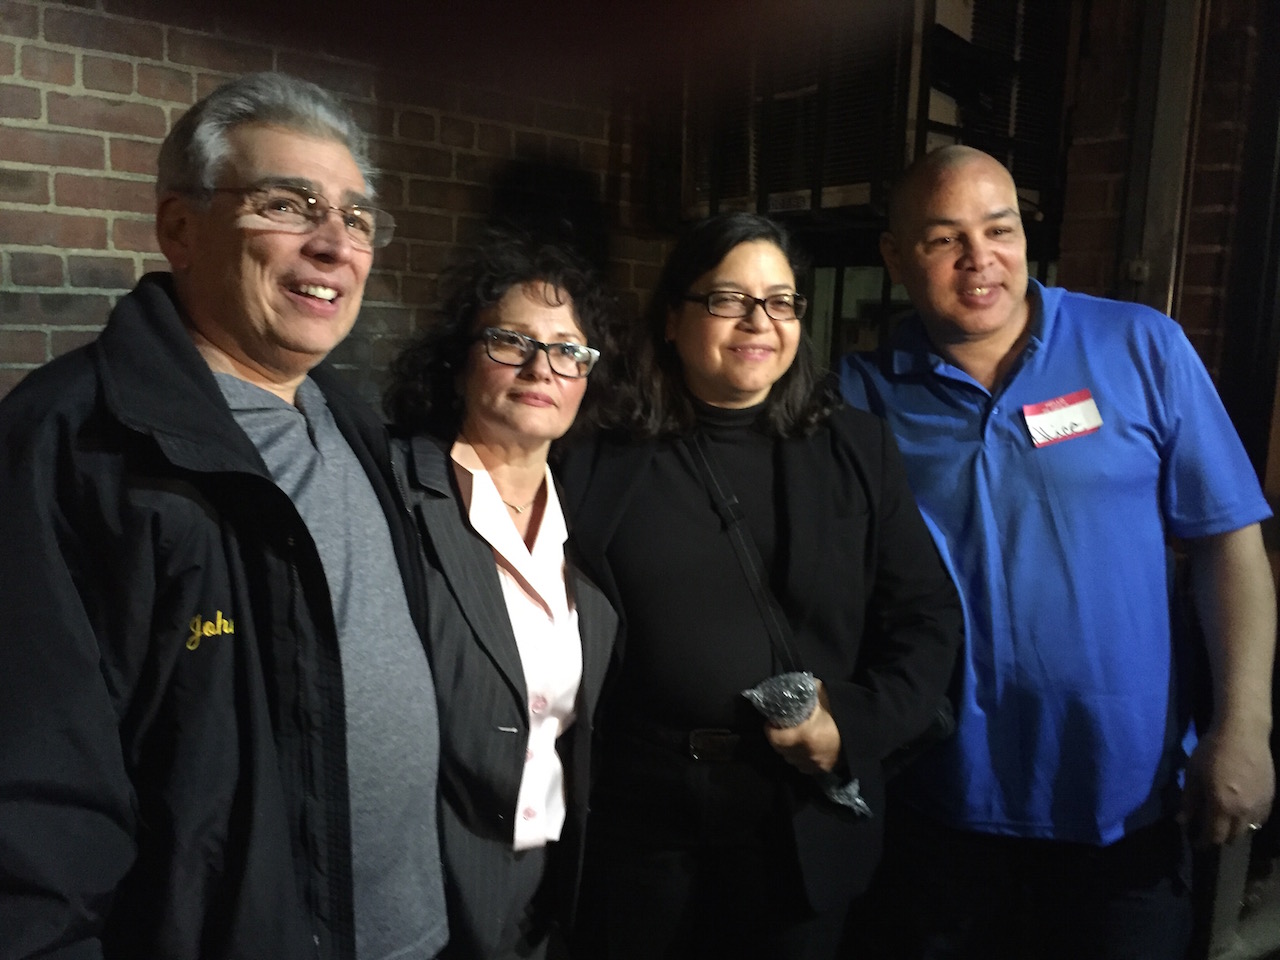 Winning candidate Alice Cancel, second from left, with supporters, from left, former District Leader John Fratta, Councilmember Rosie Mendez and District Leader Pedro Carti.